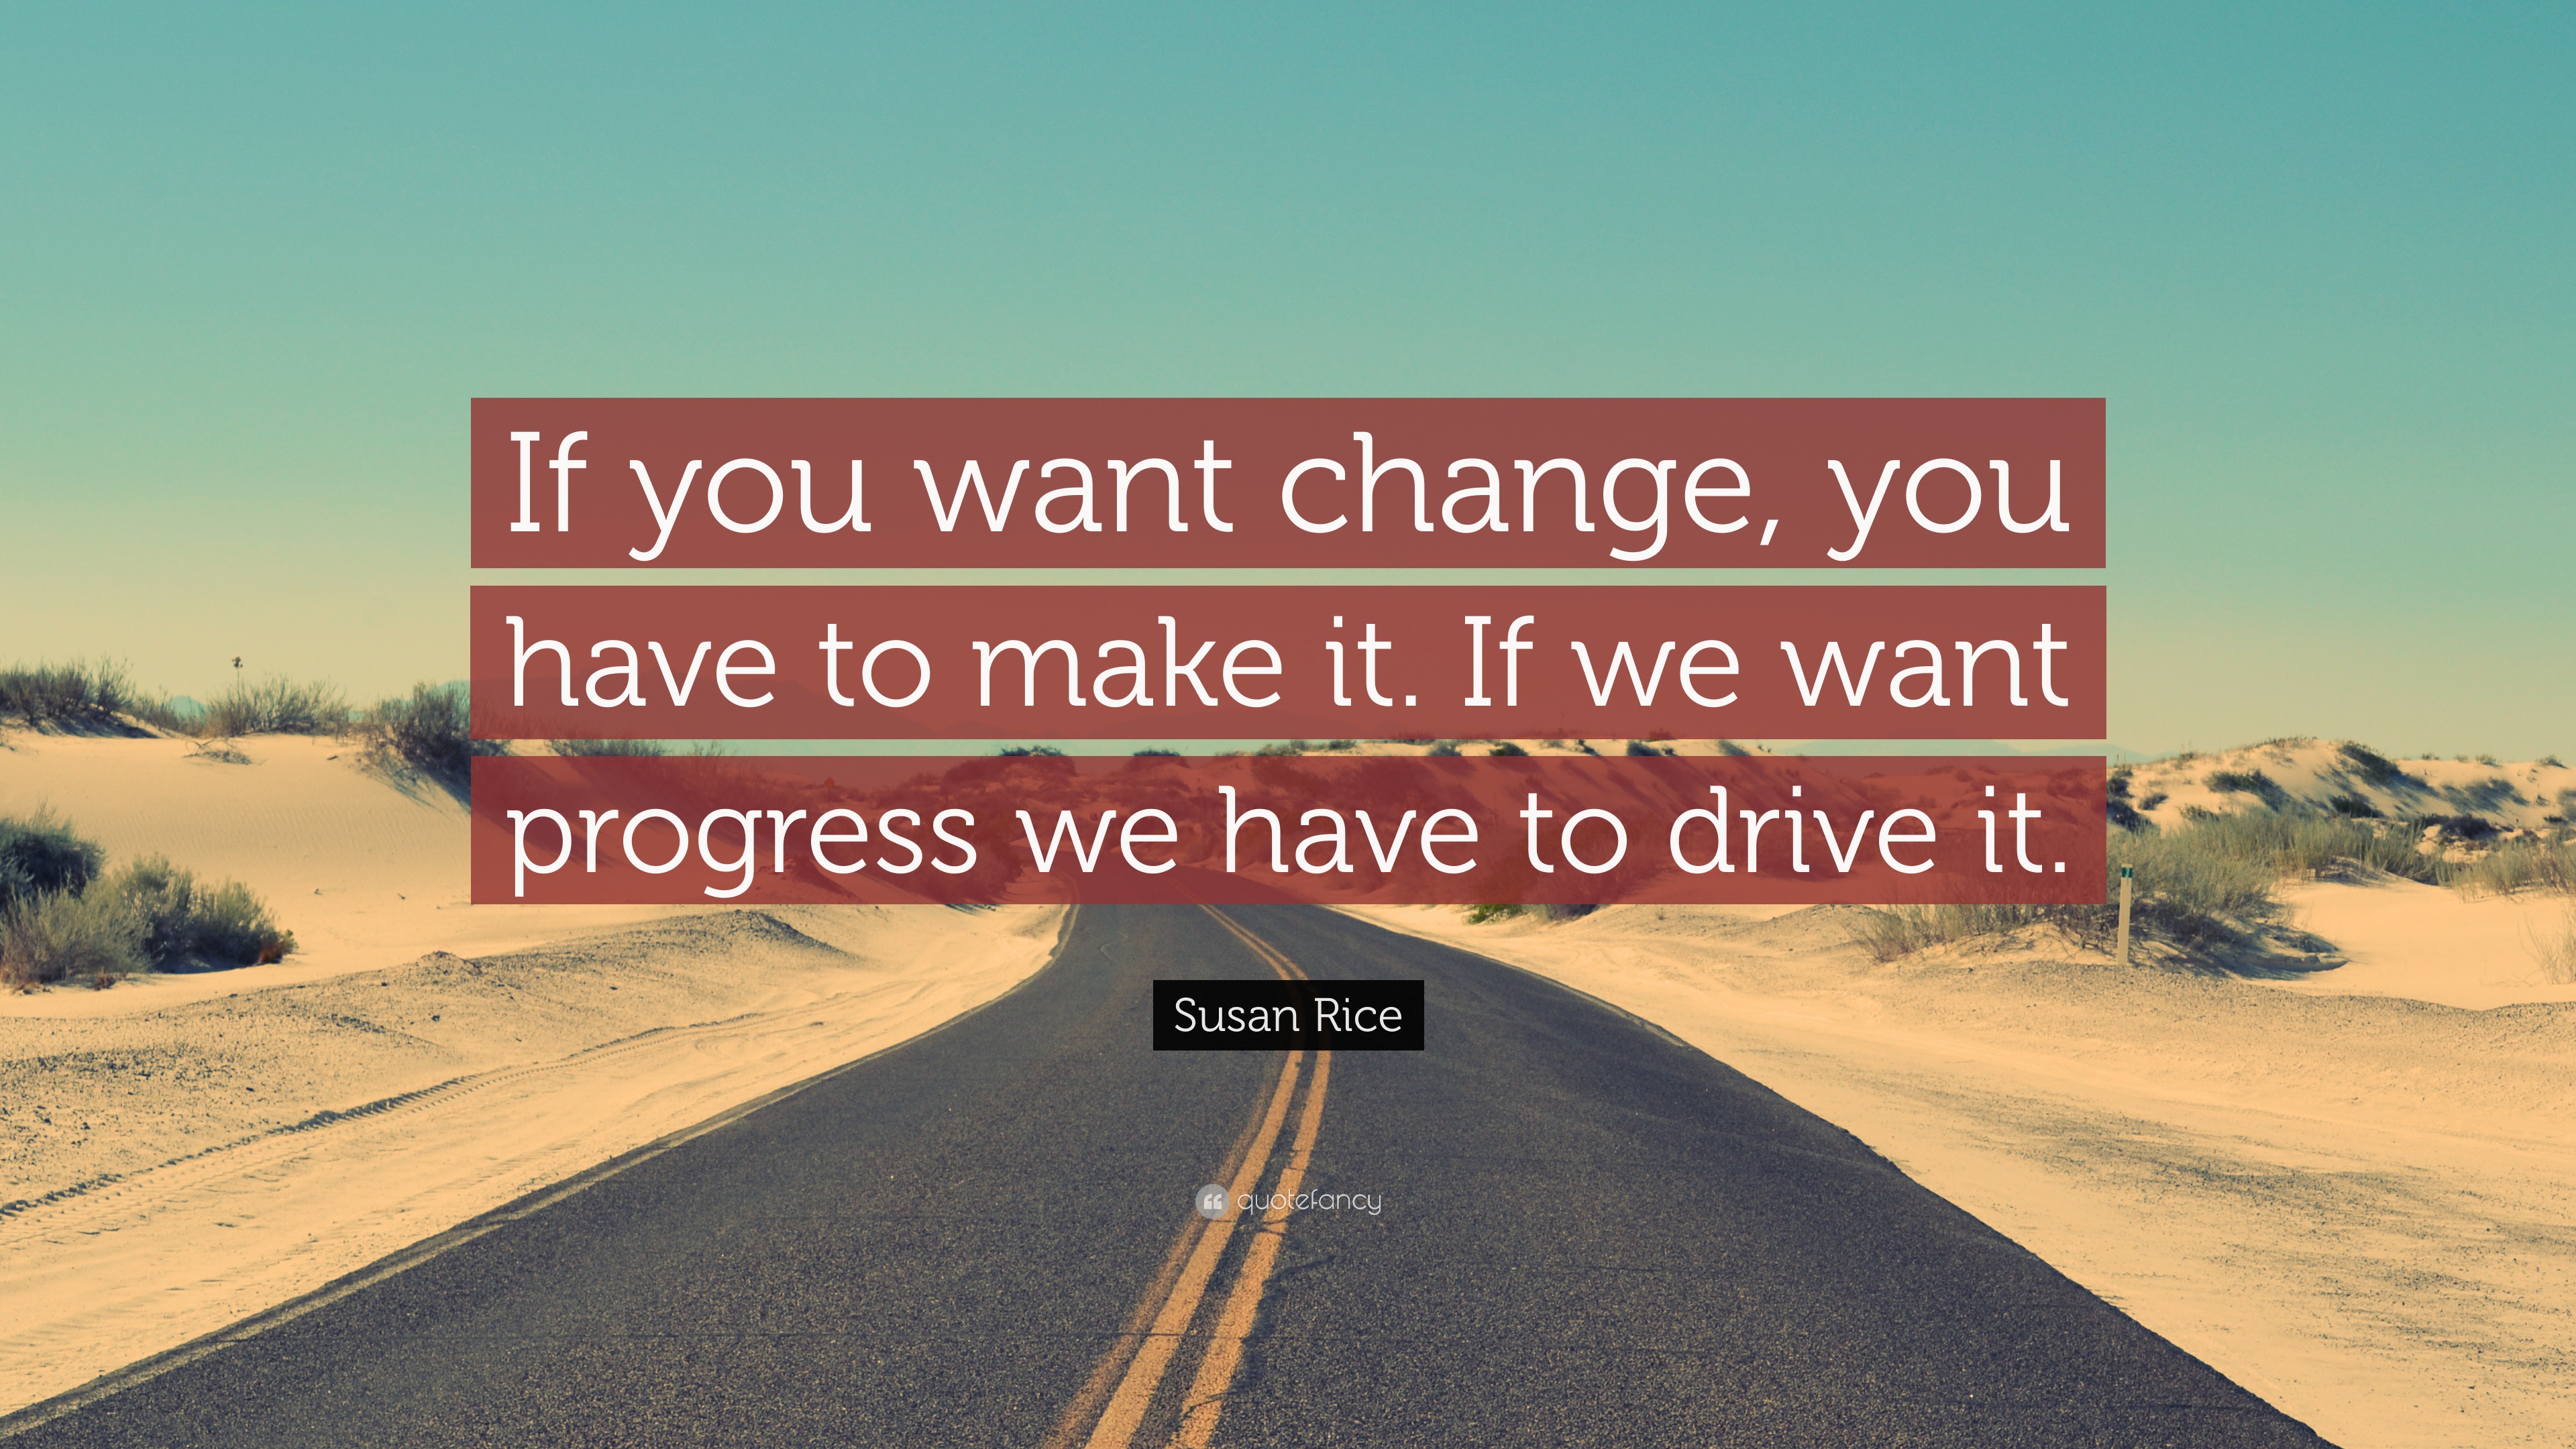 Susan Rice Quote: “If you want change, you have to make it. If we want ...